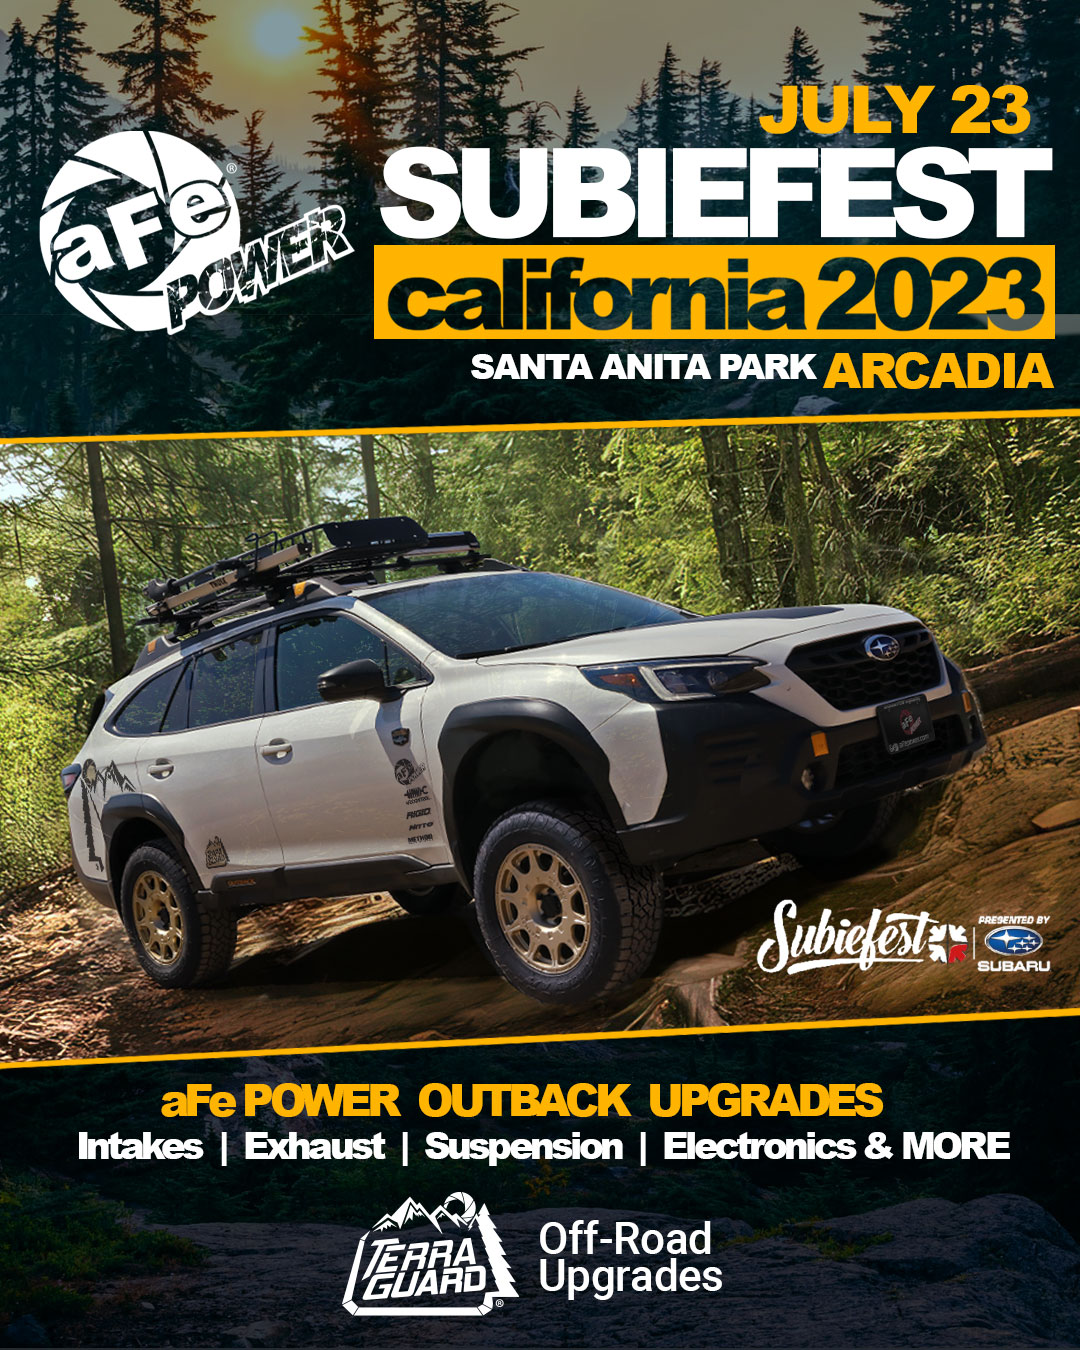 White Outback Wilderness with aFe POWER Terra Guard gear for Subiefest